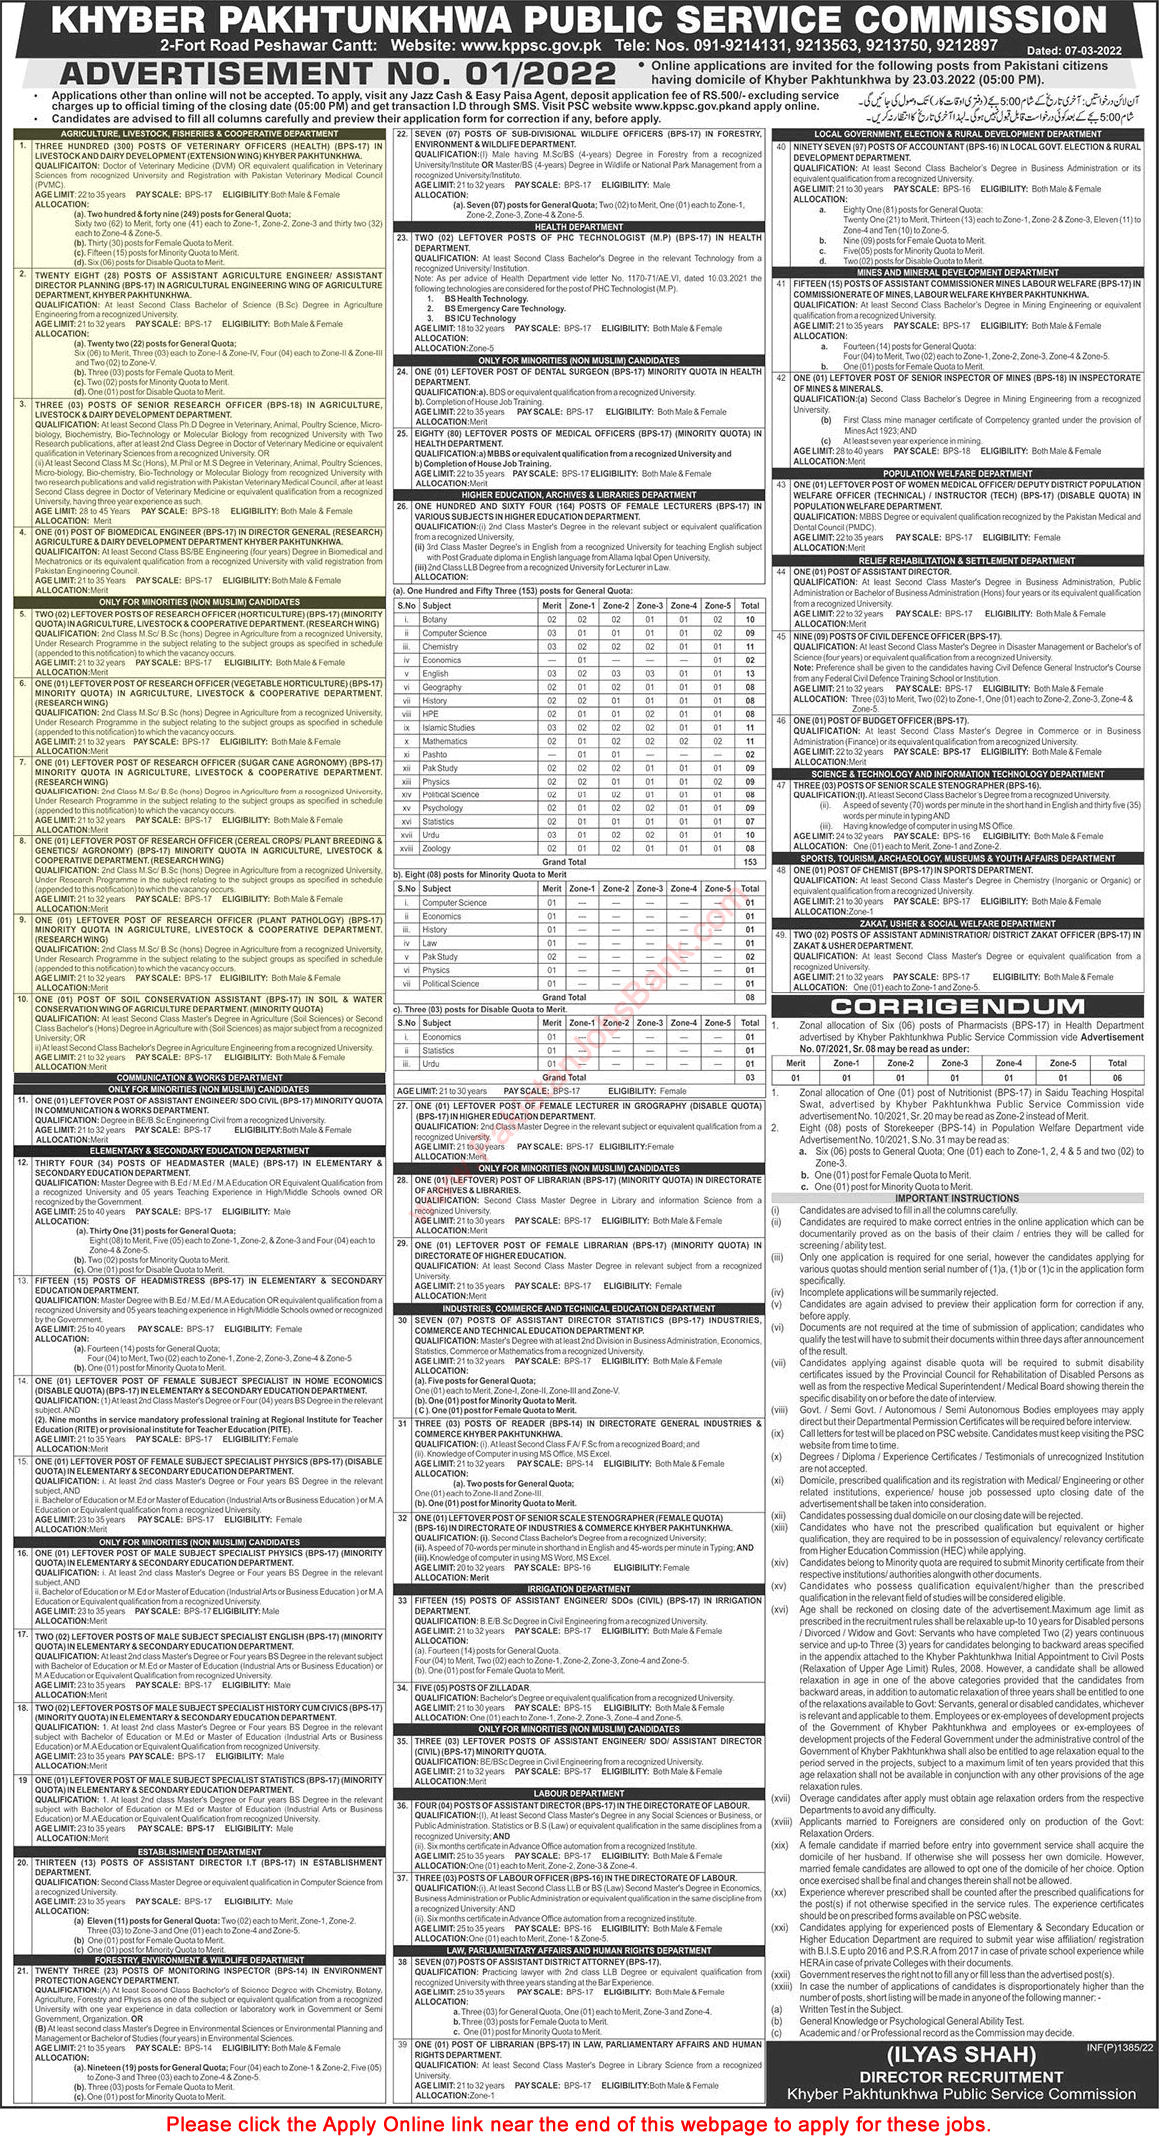 Agriculture Livestock Fisheries and Cooperative Department KPK Jobs 2022 March KPPSC Apply Online Veterinary Officers & Others Latest